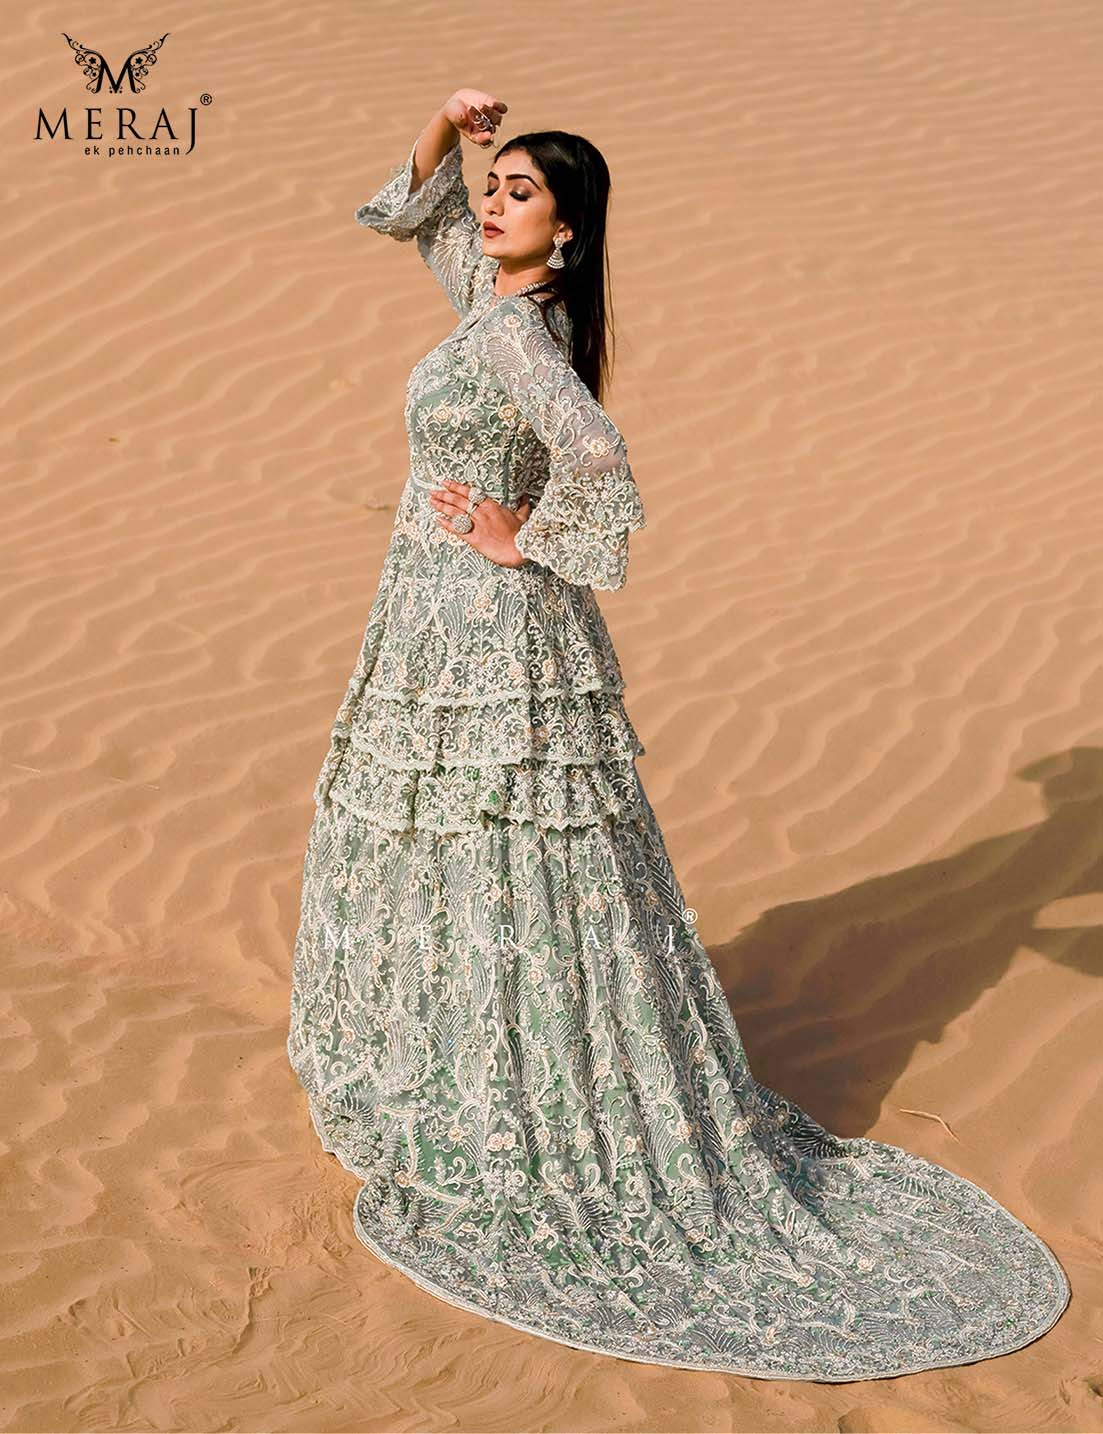 Sea green color Indo-western gown